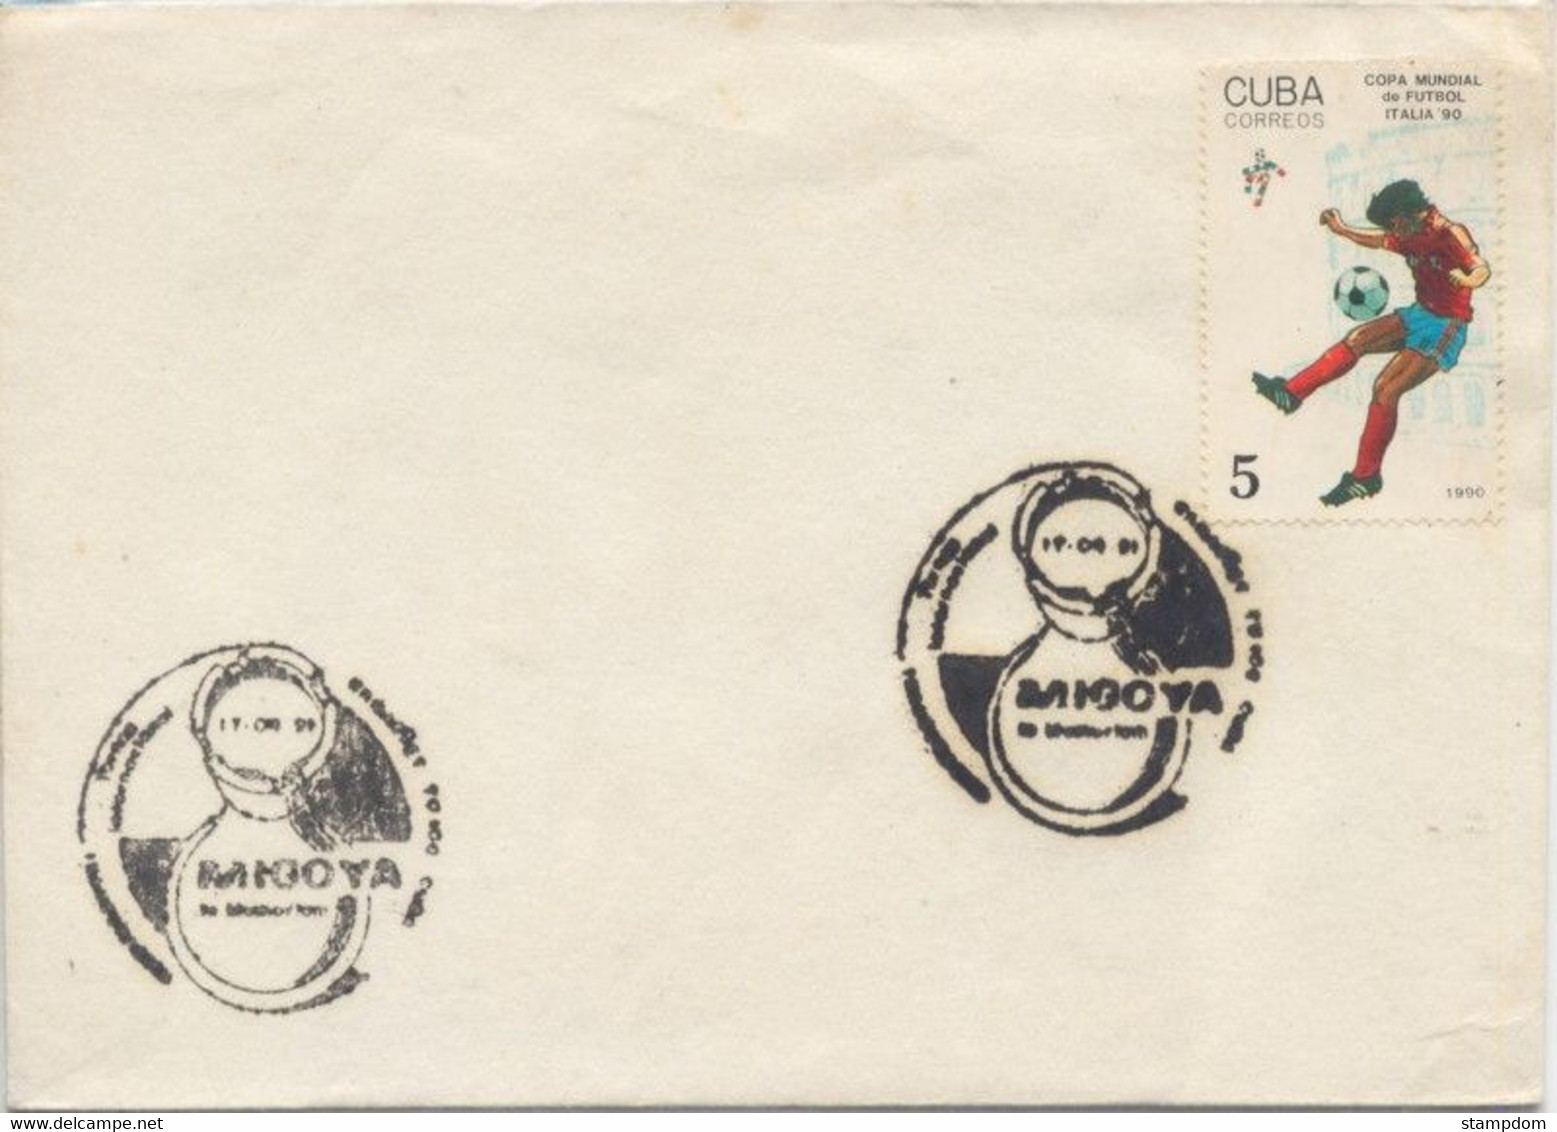 CUBA 1991 MIGOYA Special Cancel Event COVER @D1713 - Covers & Documents